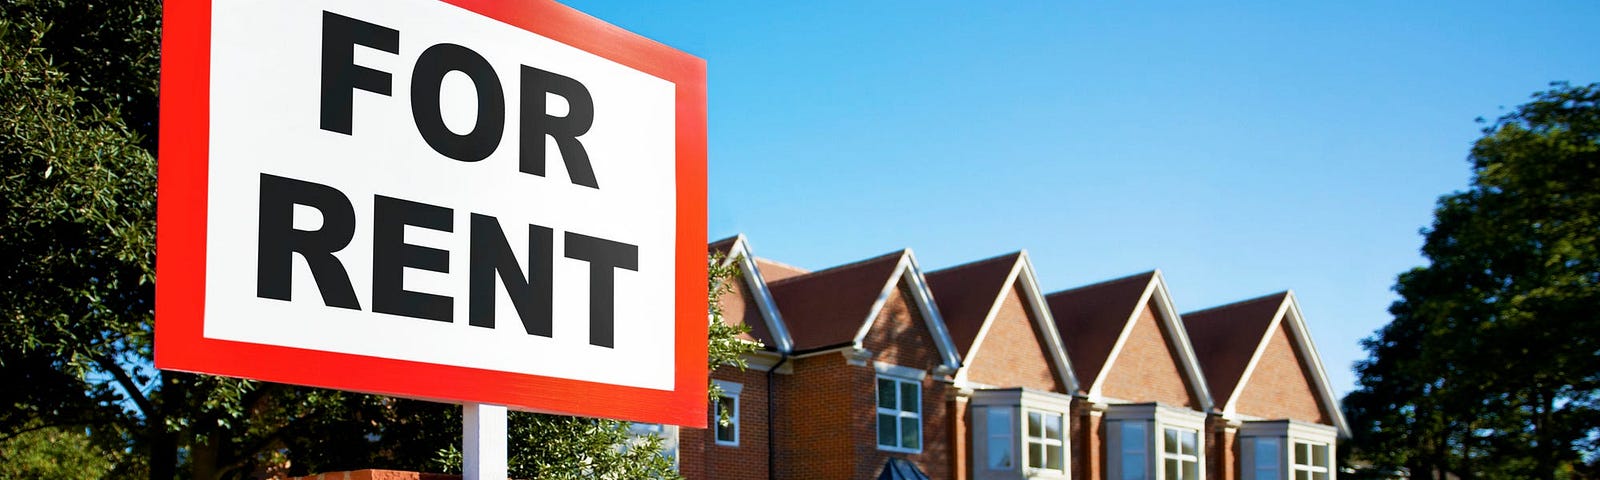 A “For Rent” sign in front of a row of homes.